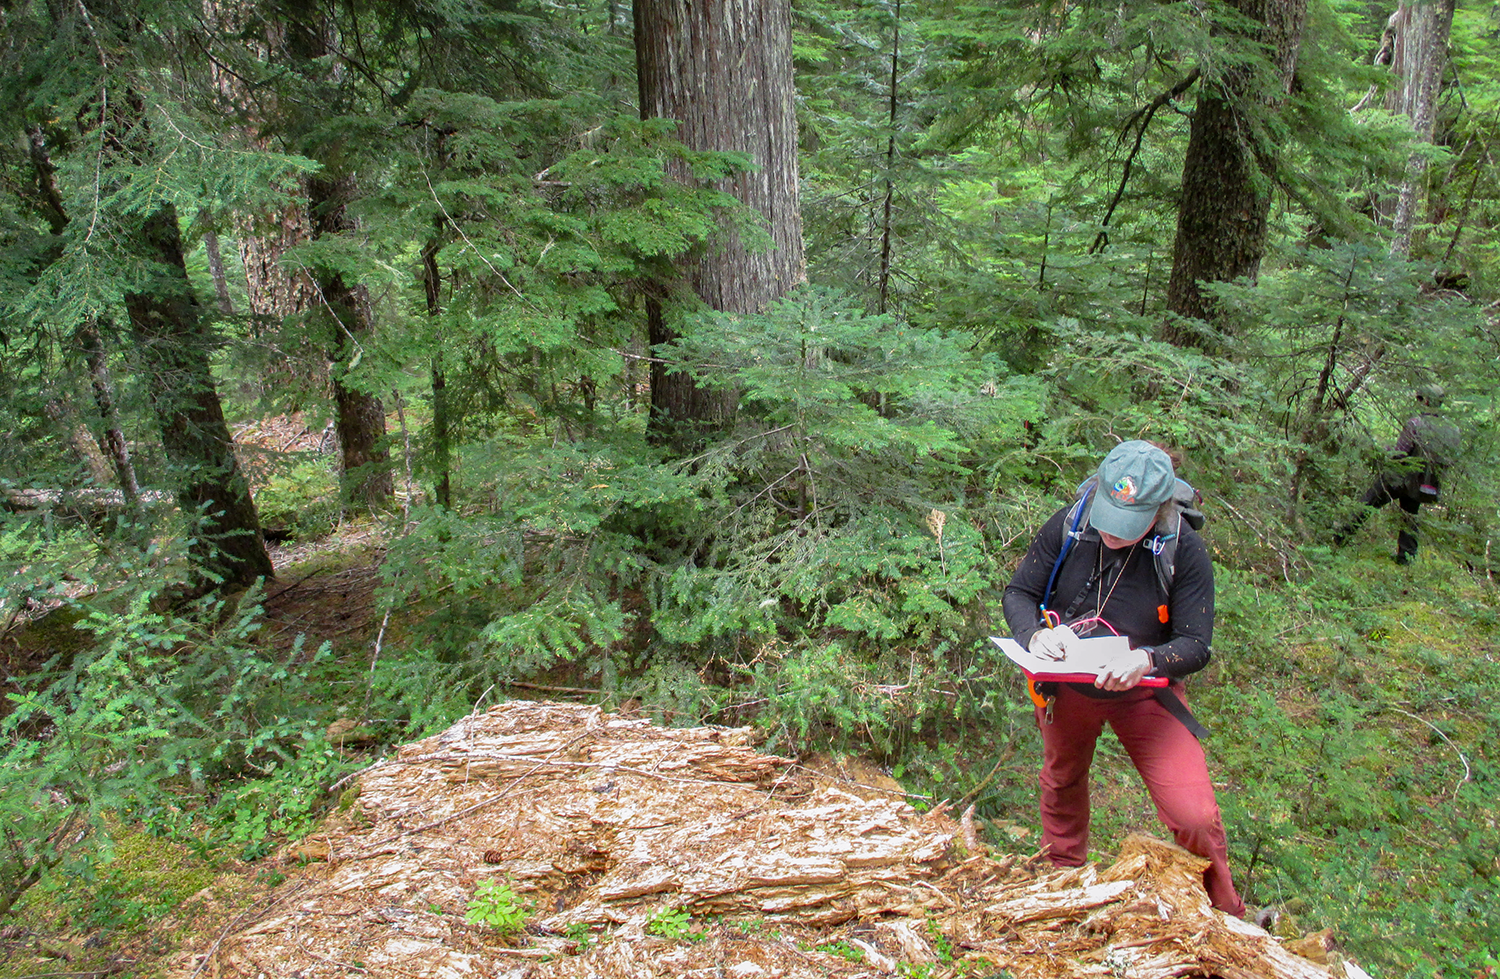 Woman in field clothes and ball cap stands in a forest writing on a clipboard